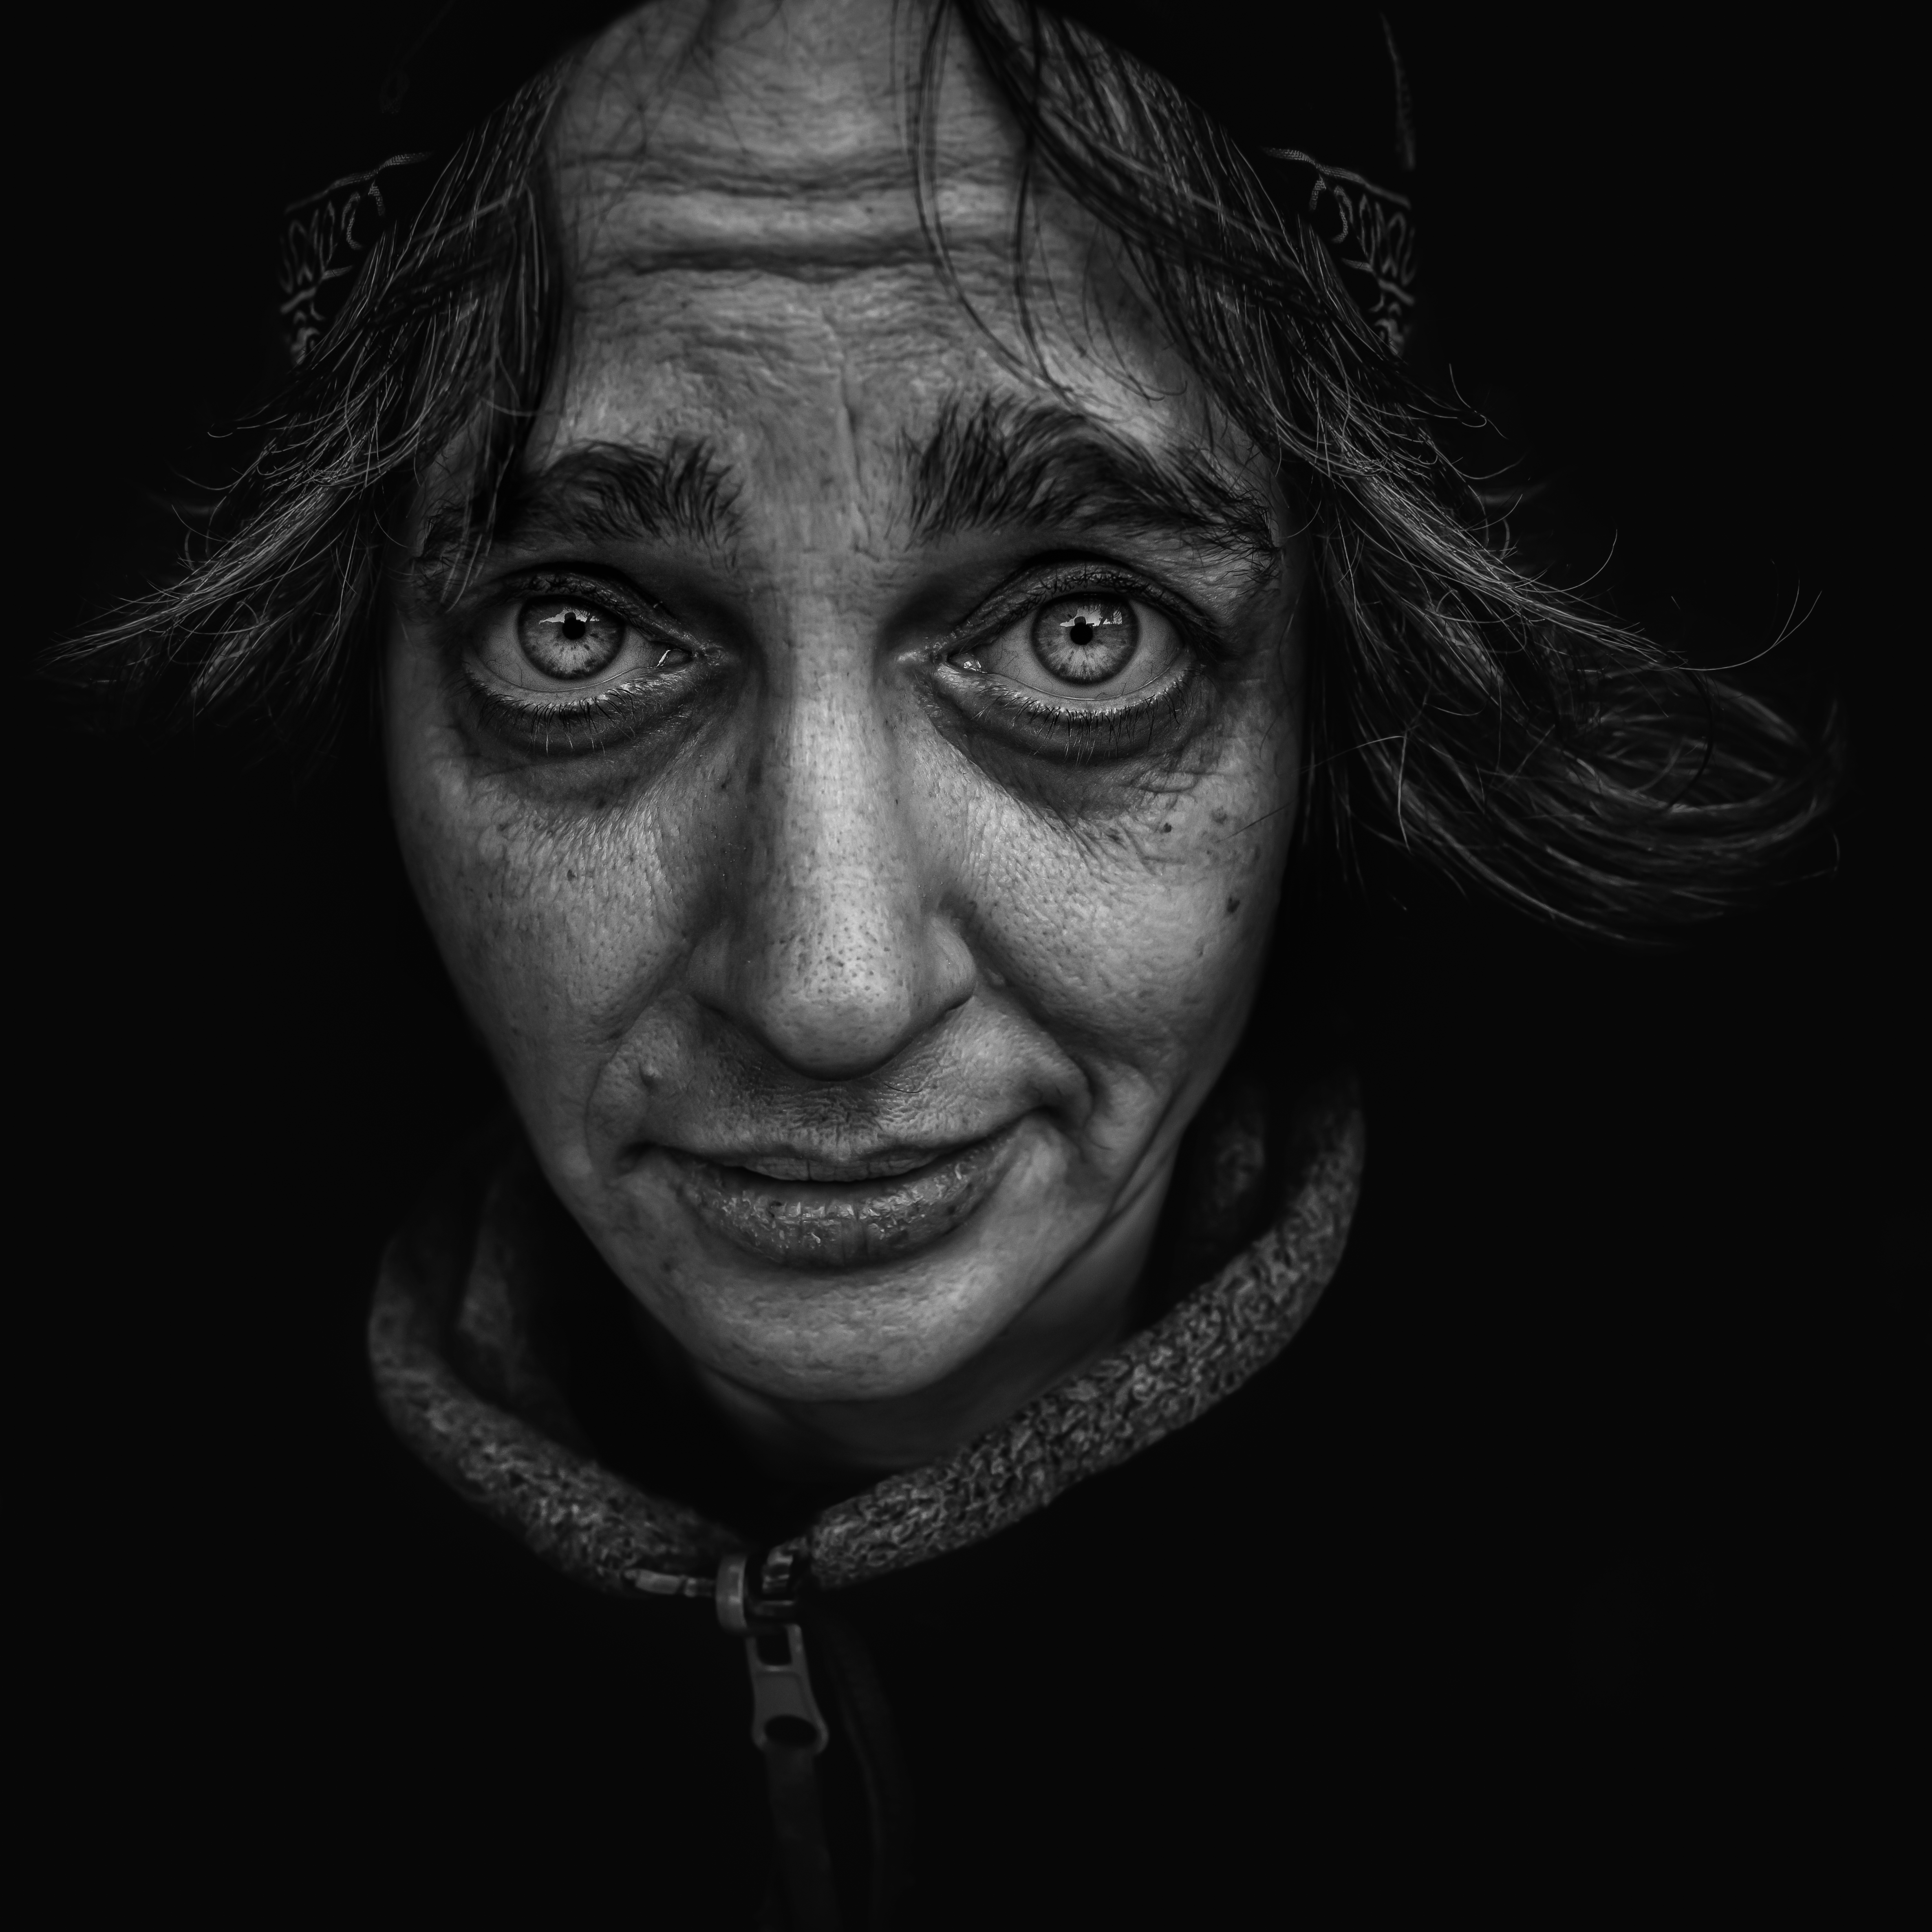 Enigmatic Portraits Of The Homeless By Lee Jeffries